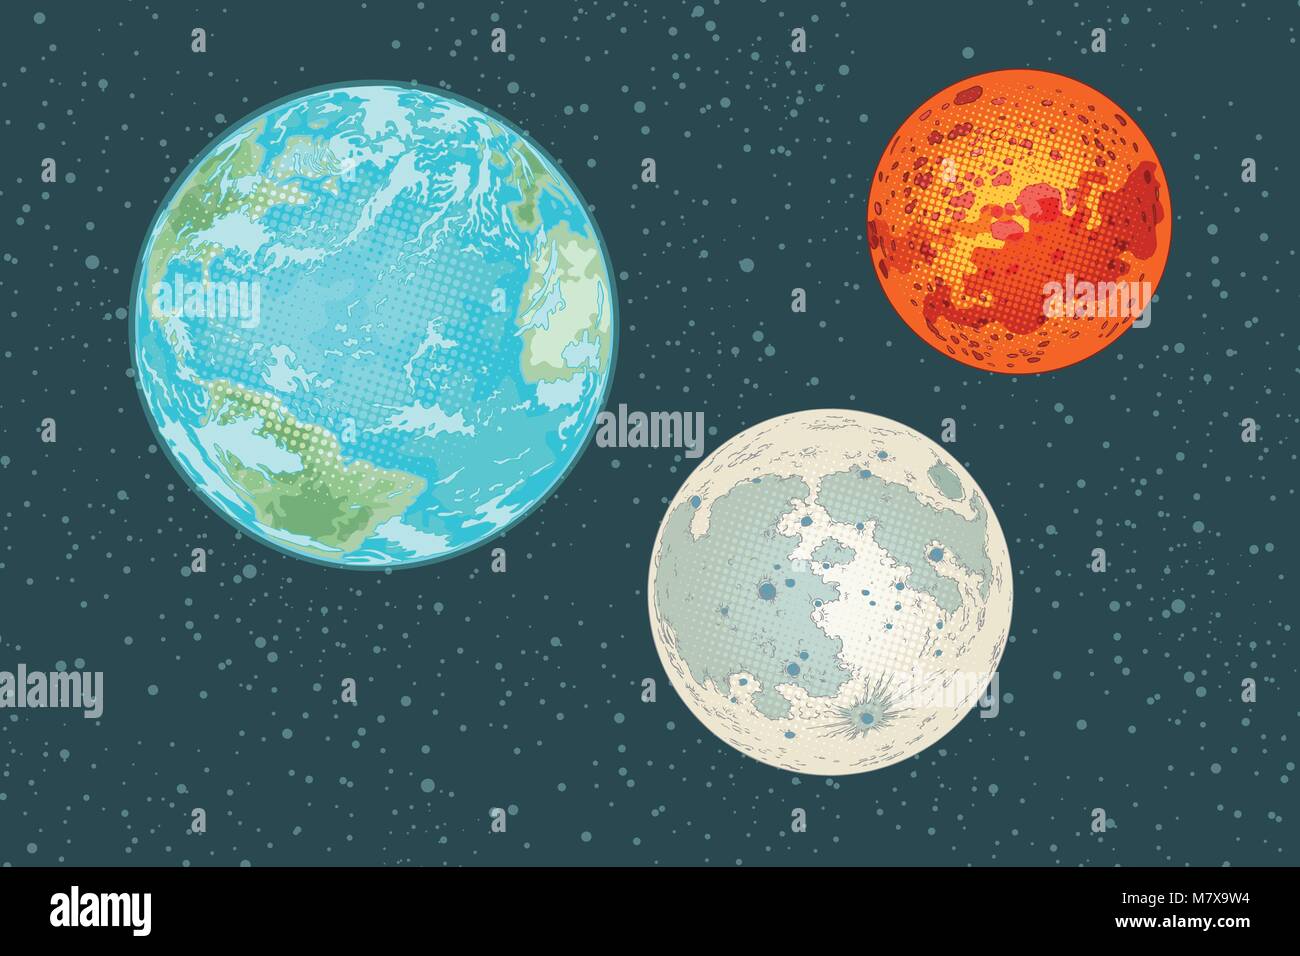 Mars earth and moon, planets of the solar system Stock Vector